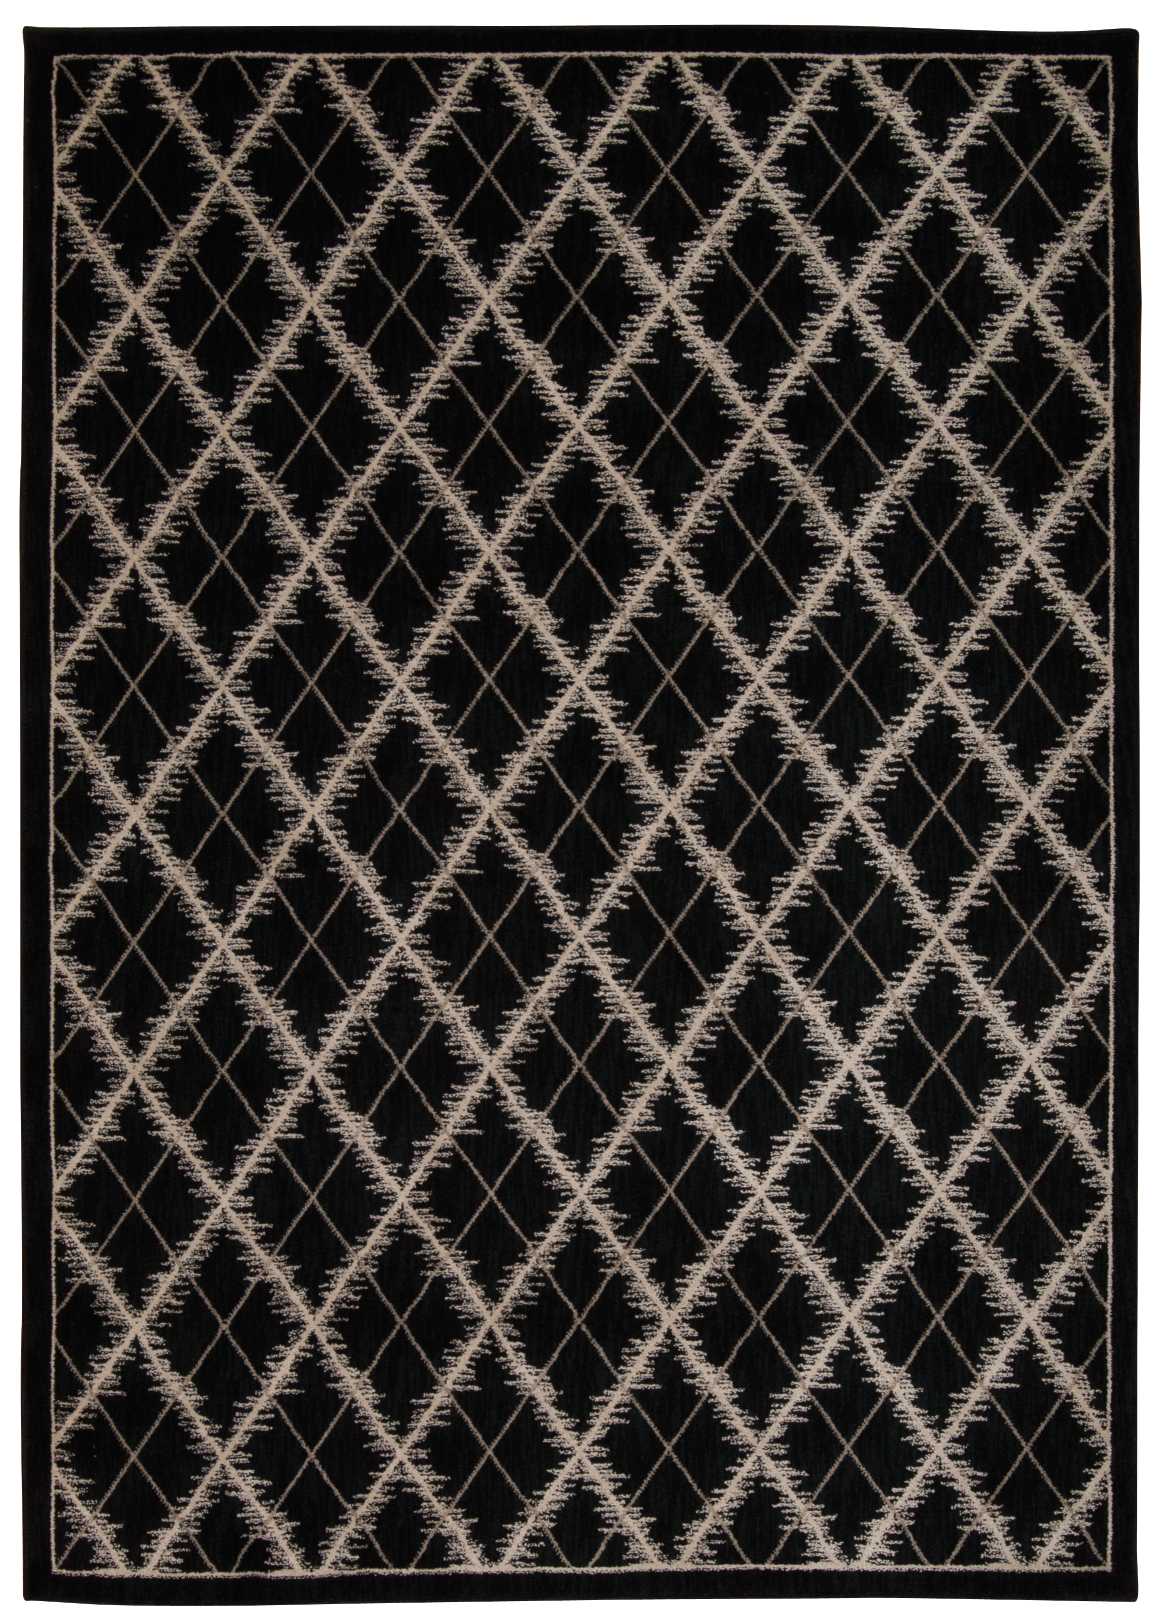 Nourison Home Tranquility TNQ01 Black  Transitional Machinemade Rug